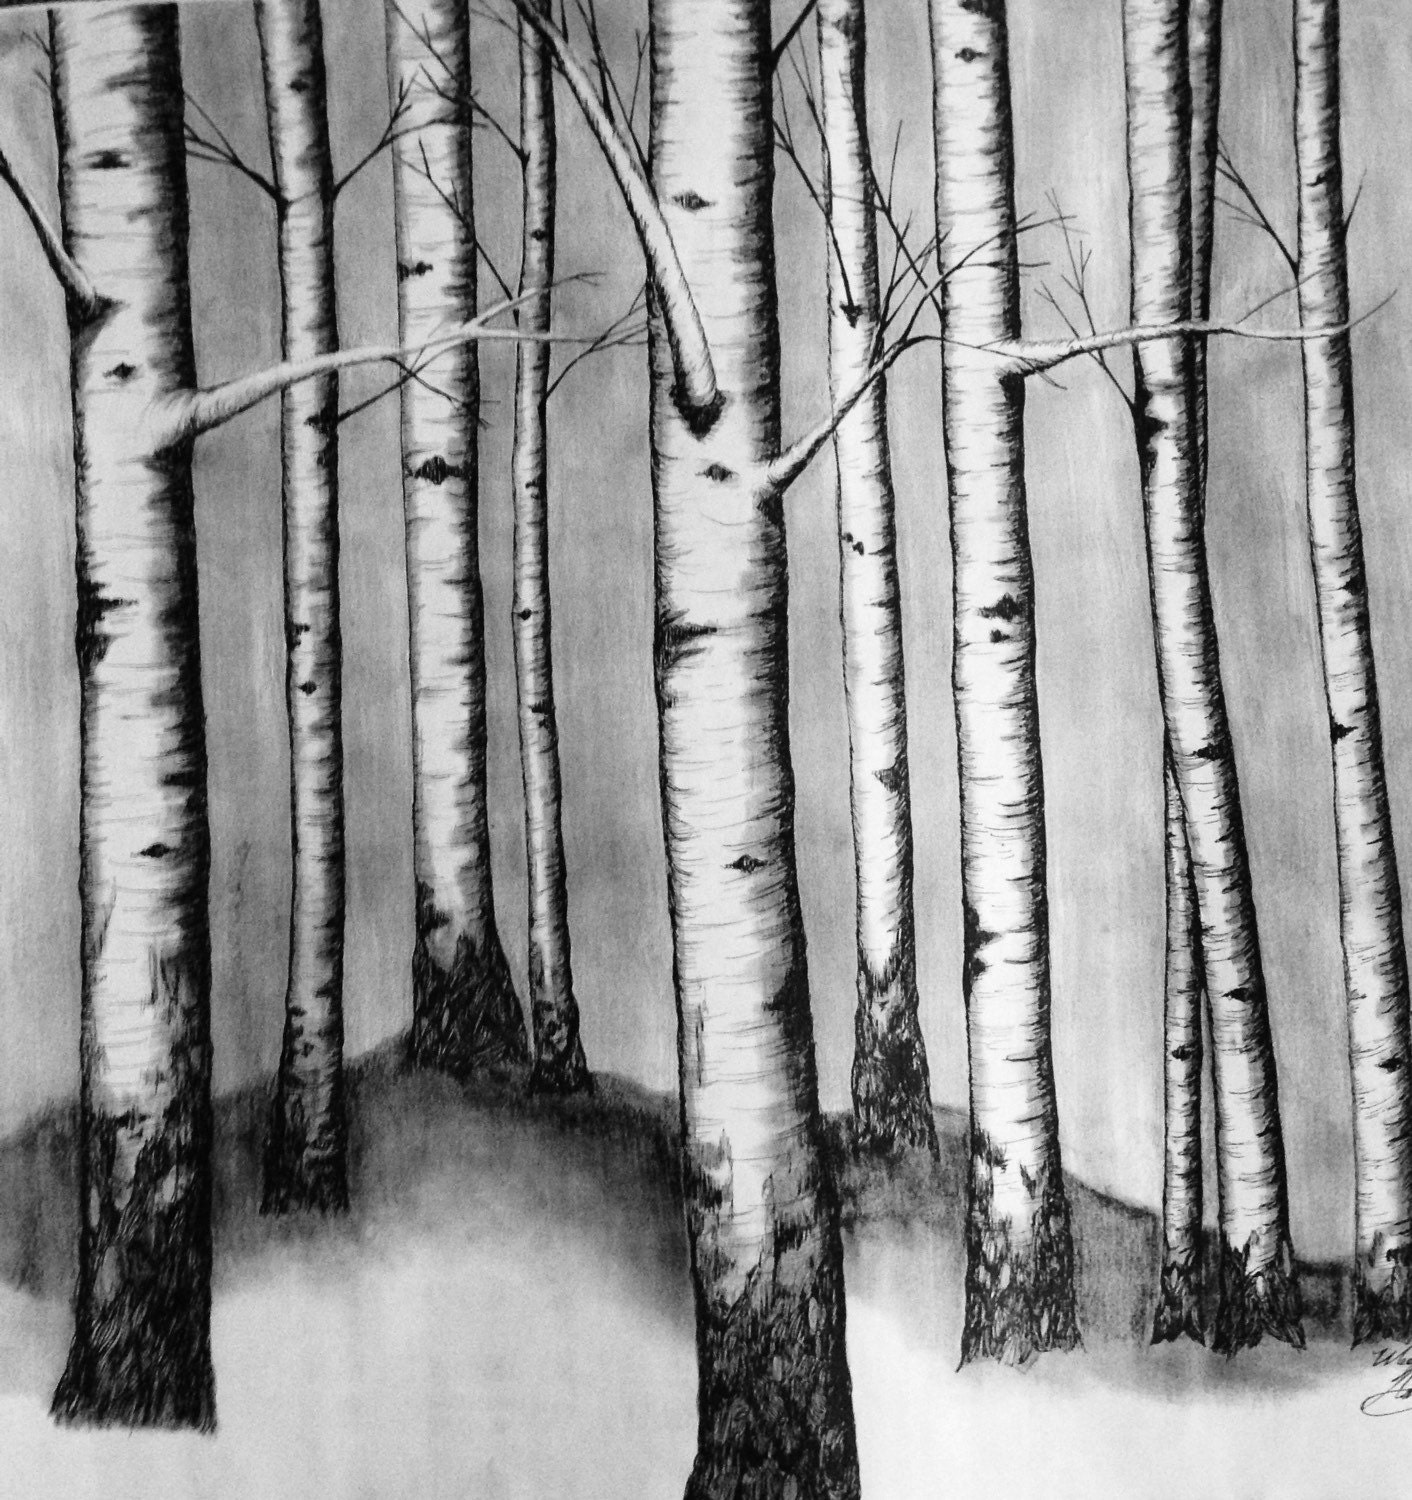 Charcoal Drawing Birch Tree Forrest Art by ChicCharcoals on Etsy